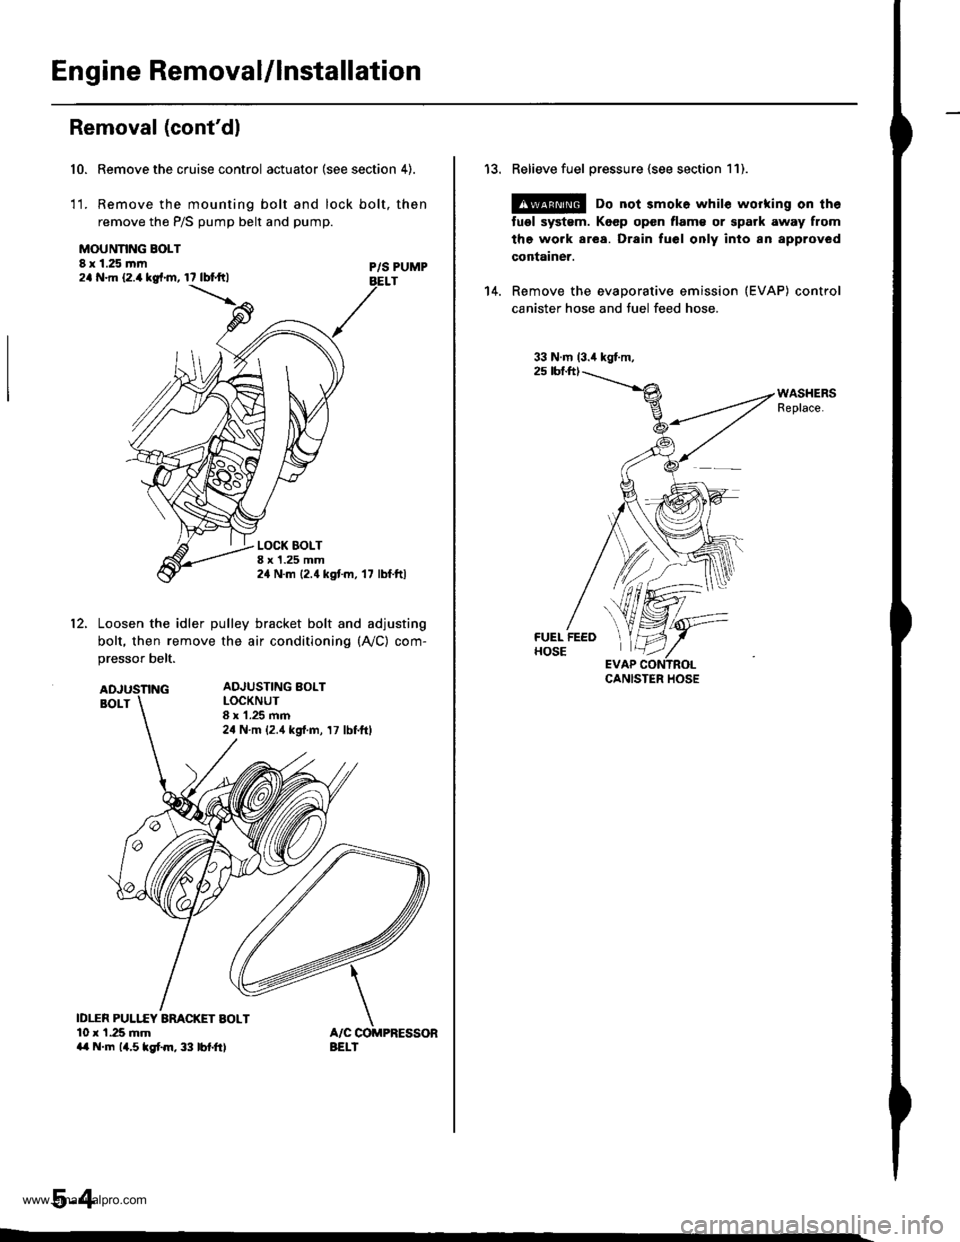 HONDA CR-V 1998 RD1-RD3 / 1.G User Guide 
Engine Removal/lnstallation
Removal (contdl
Remove the cruise control actuator (see section 4).
Remove the mounting bolt and lock bolt, then
remove the P/S pump belt and pump.
10.
1t.
MOUNNNG BOLT8 